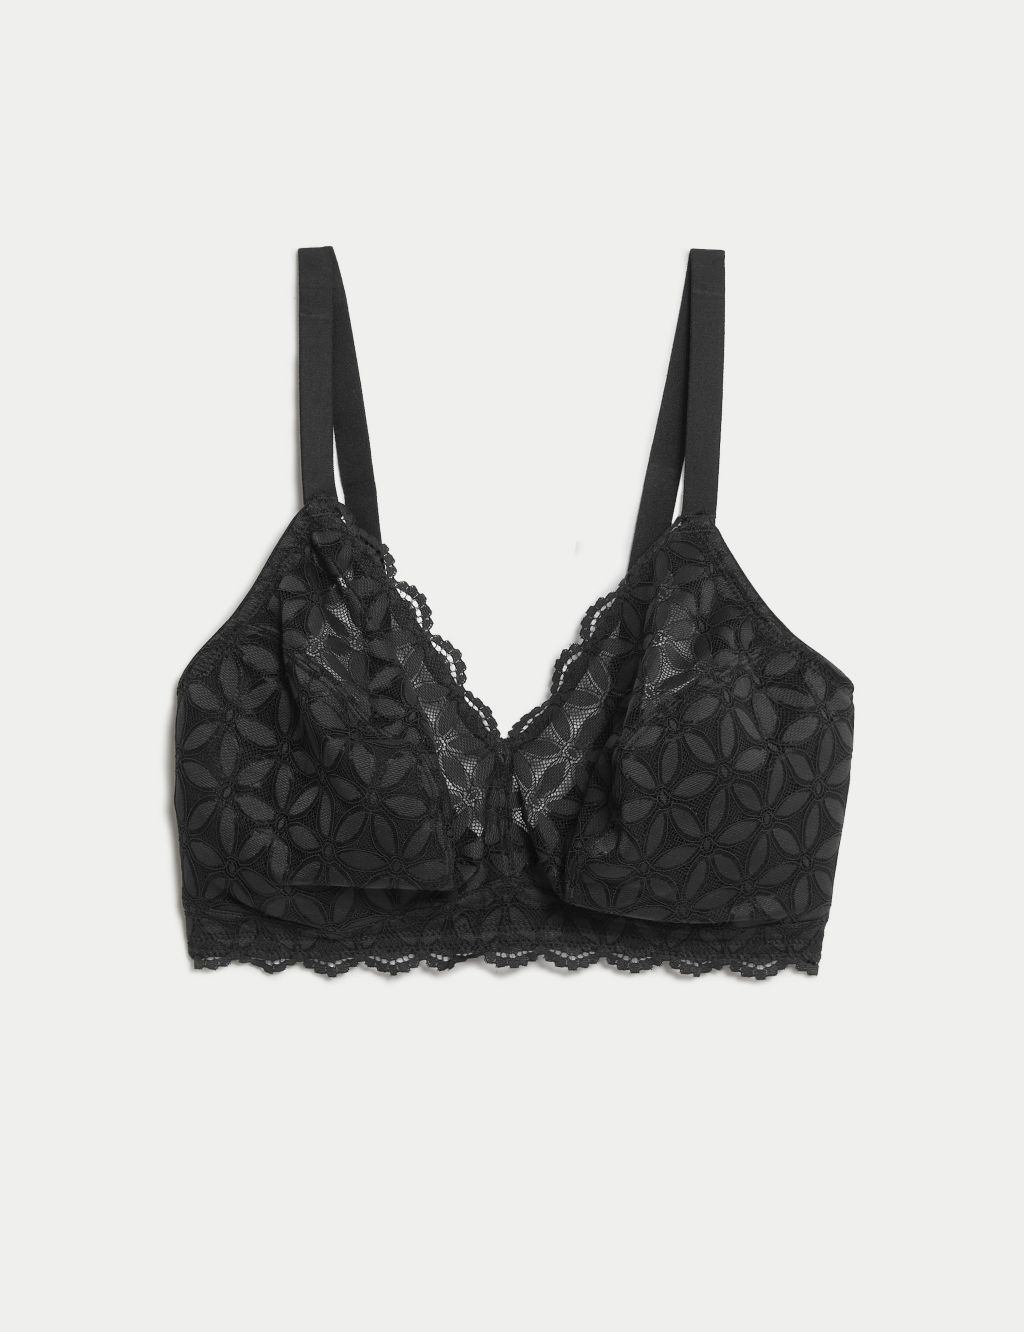 This M&S Bralette has rave reviews, but does it live up to the hype?